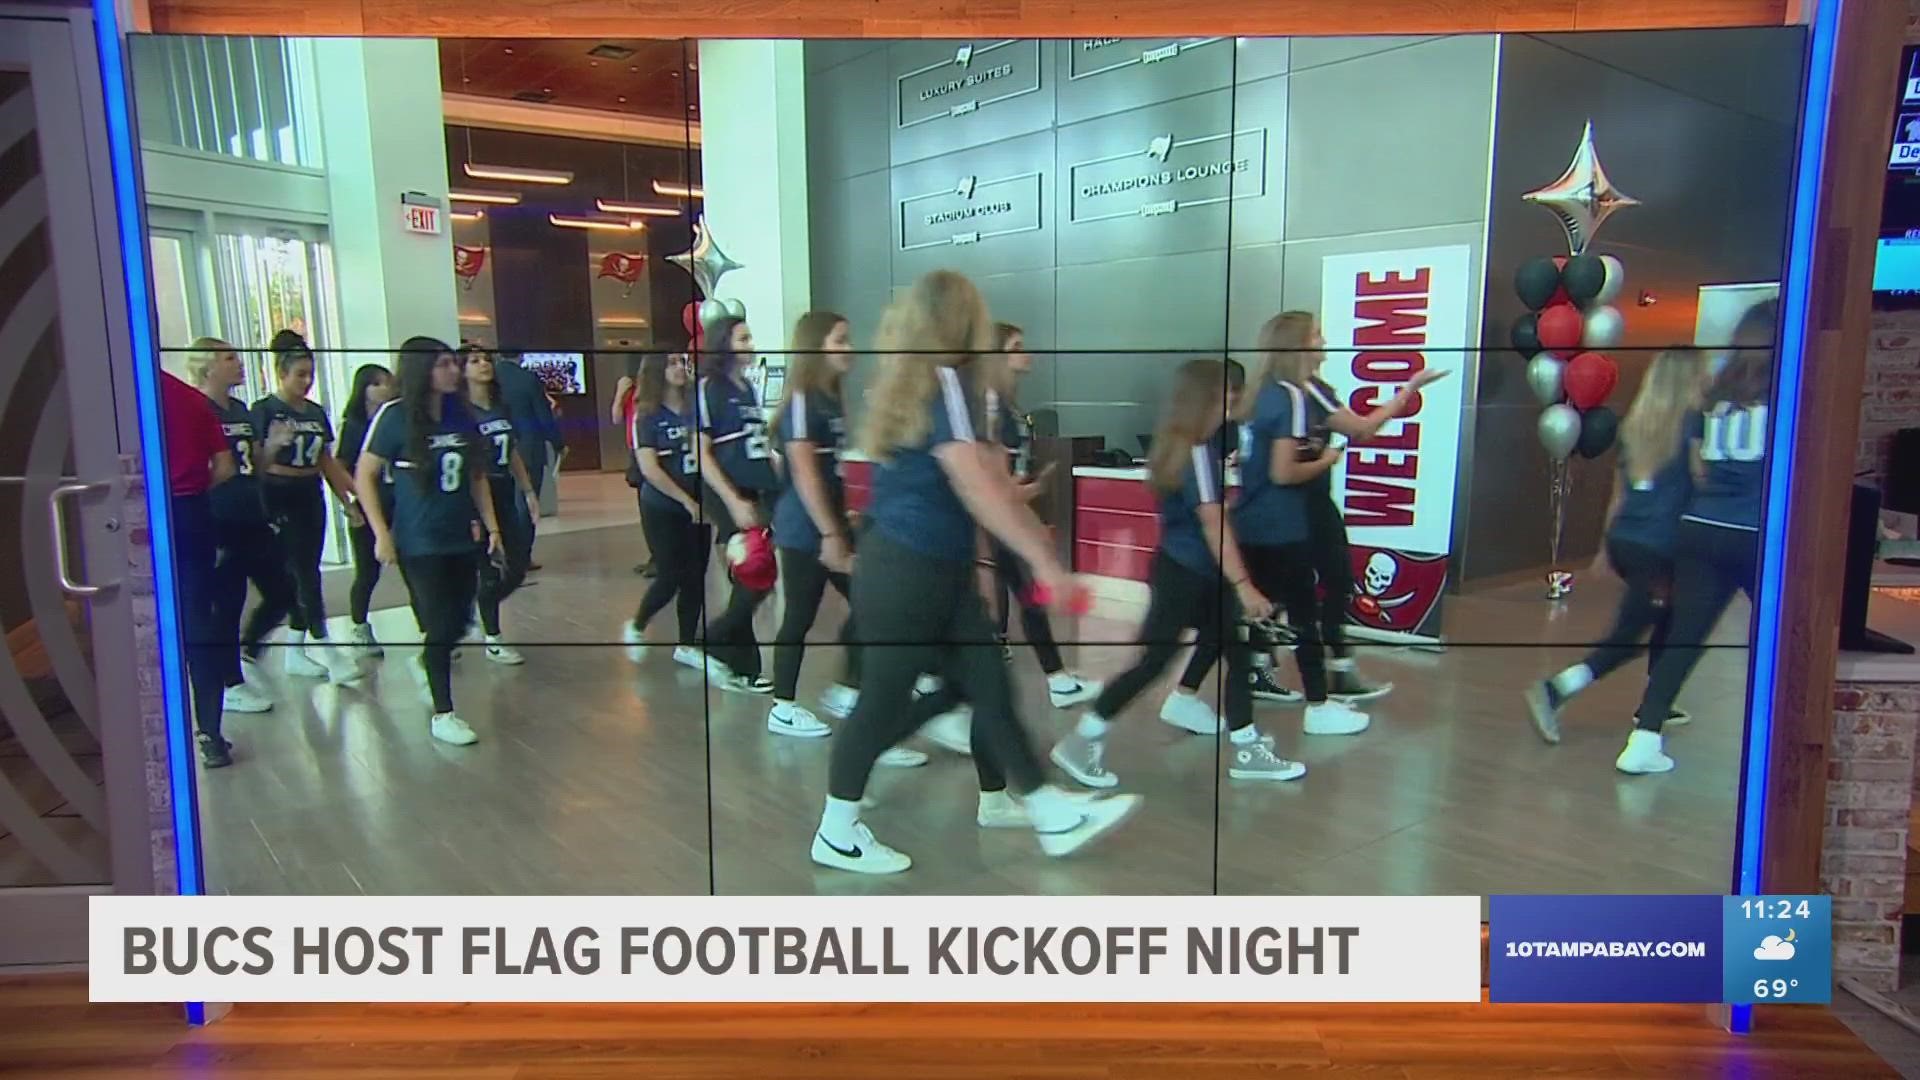 The upcoming sporting competition is the largest for girls flag football across the country.